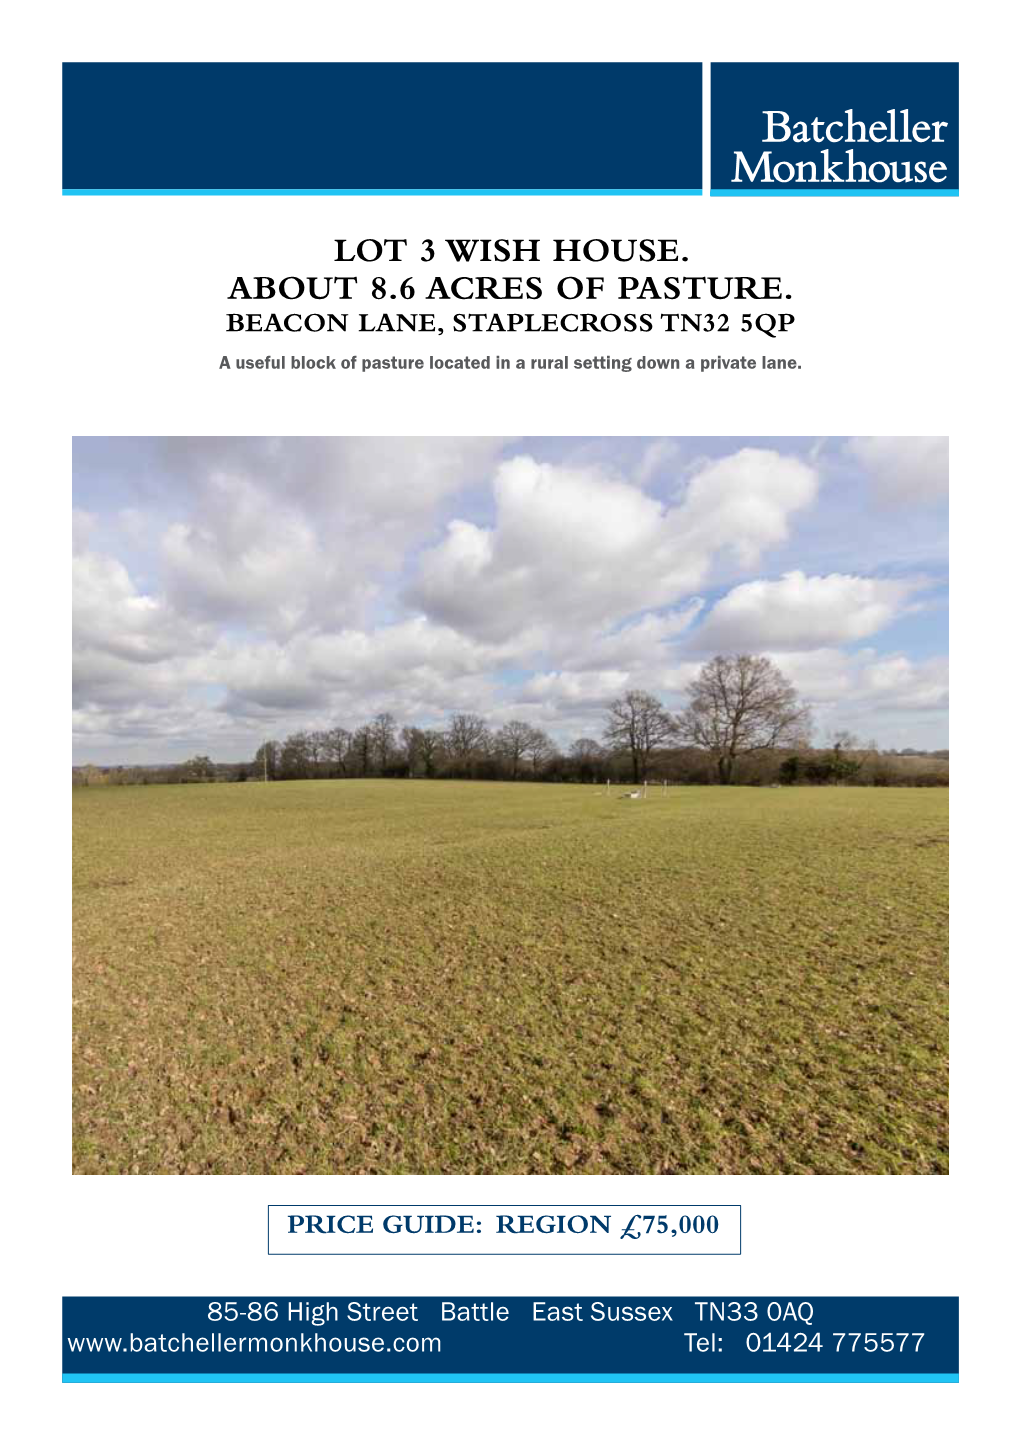 Lot 3 Wish House. About 8.6 Acres of Pasture. Beacon Lane, Staplecross Tn32 5Qp a Useful Block of Pasture Located in a Rural Setting Down a Private Lane